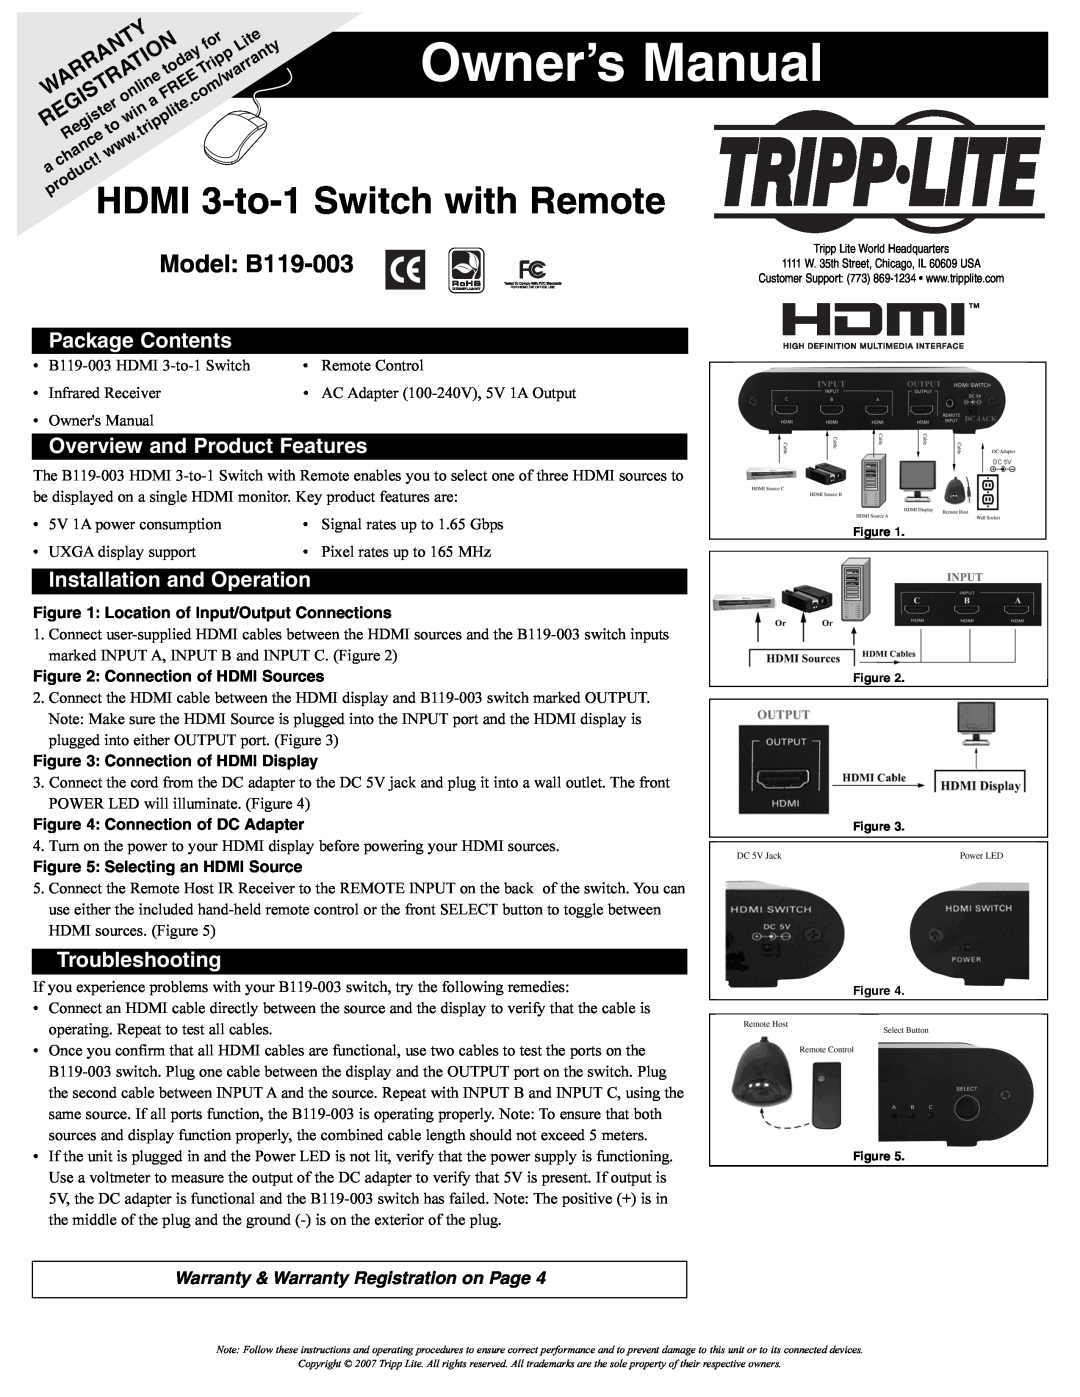 Tripp Lite owner manual HDMI 3-to-1 Switch with Remote, Model B119-003, Package Contents, Overview and Product Features 